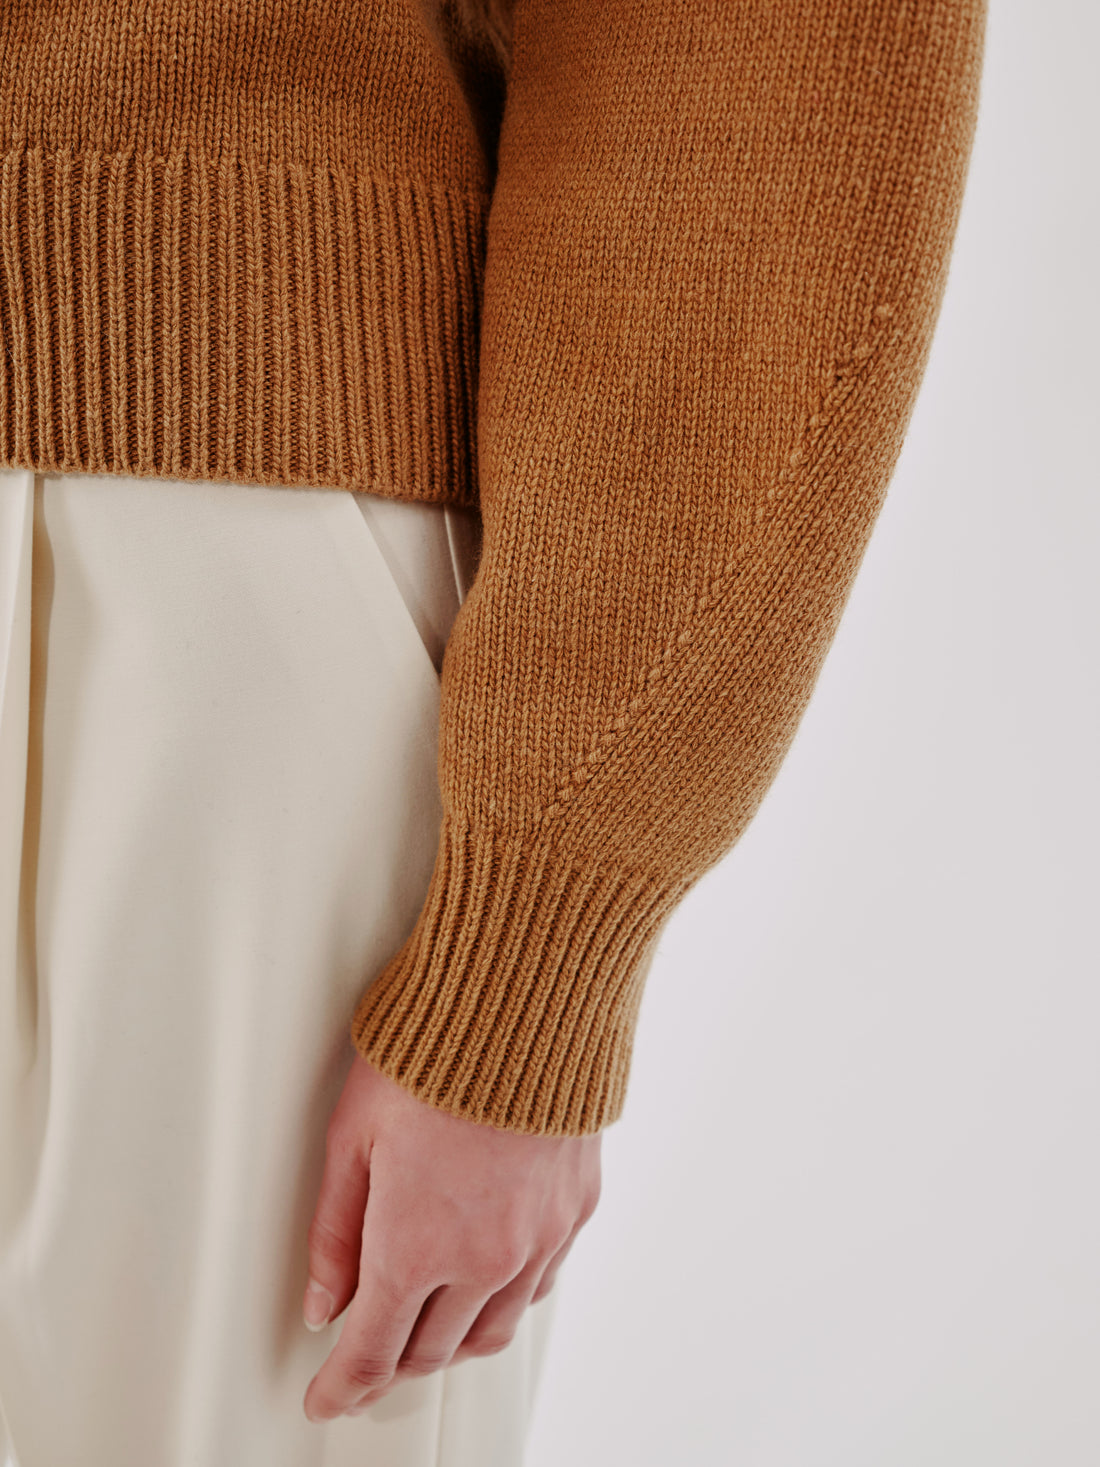 Cashmere Knit Sweatshirt – Another Tomorrow